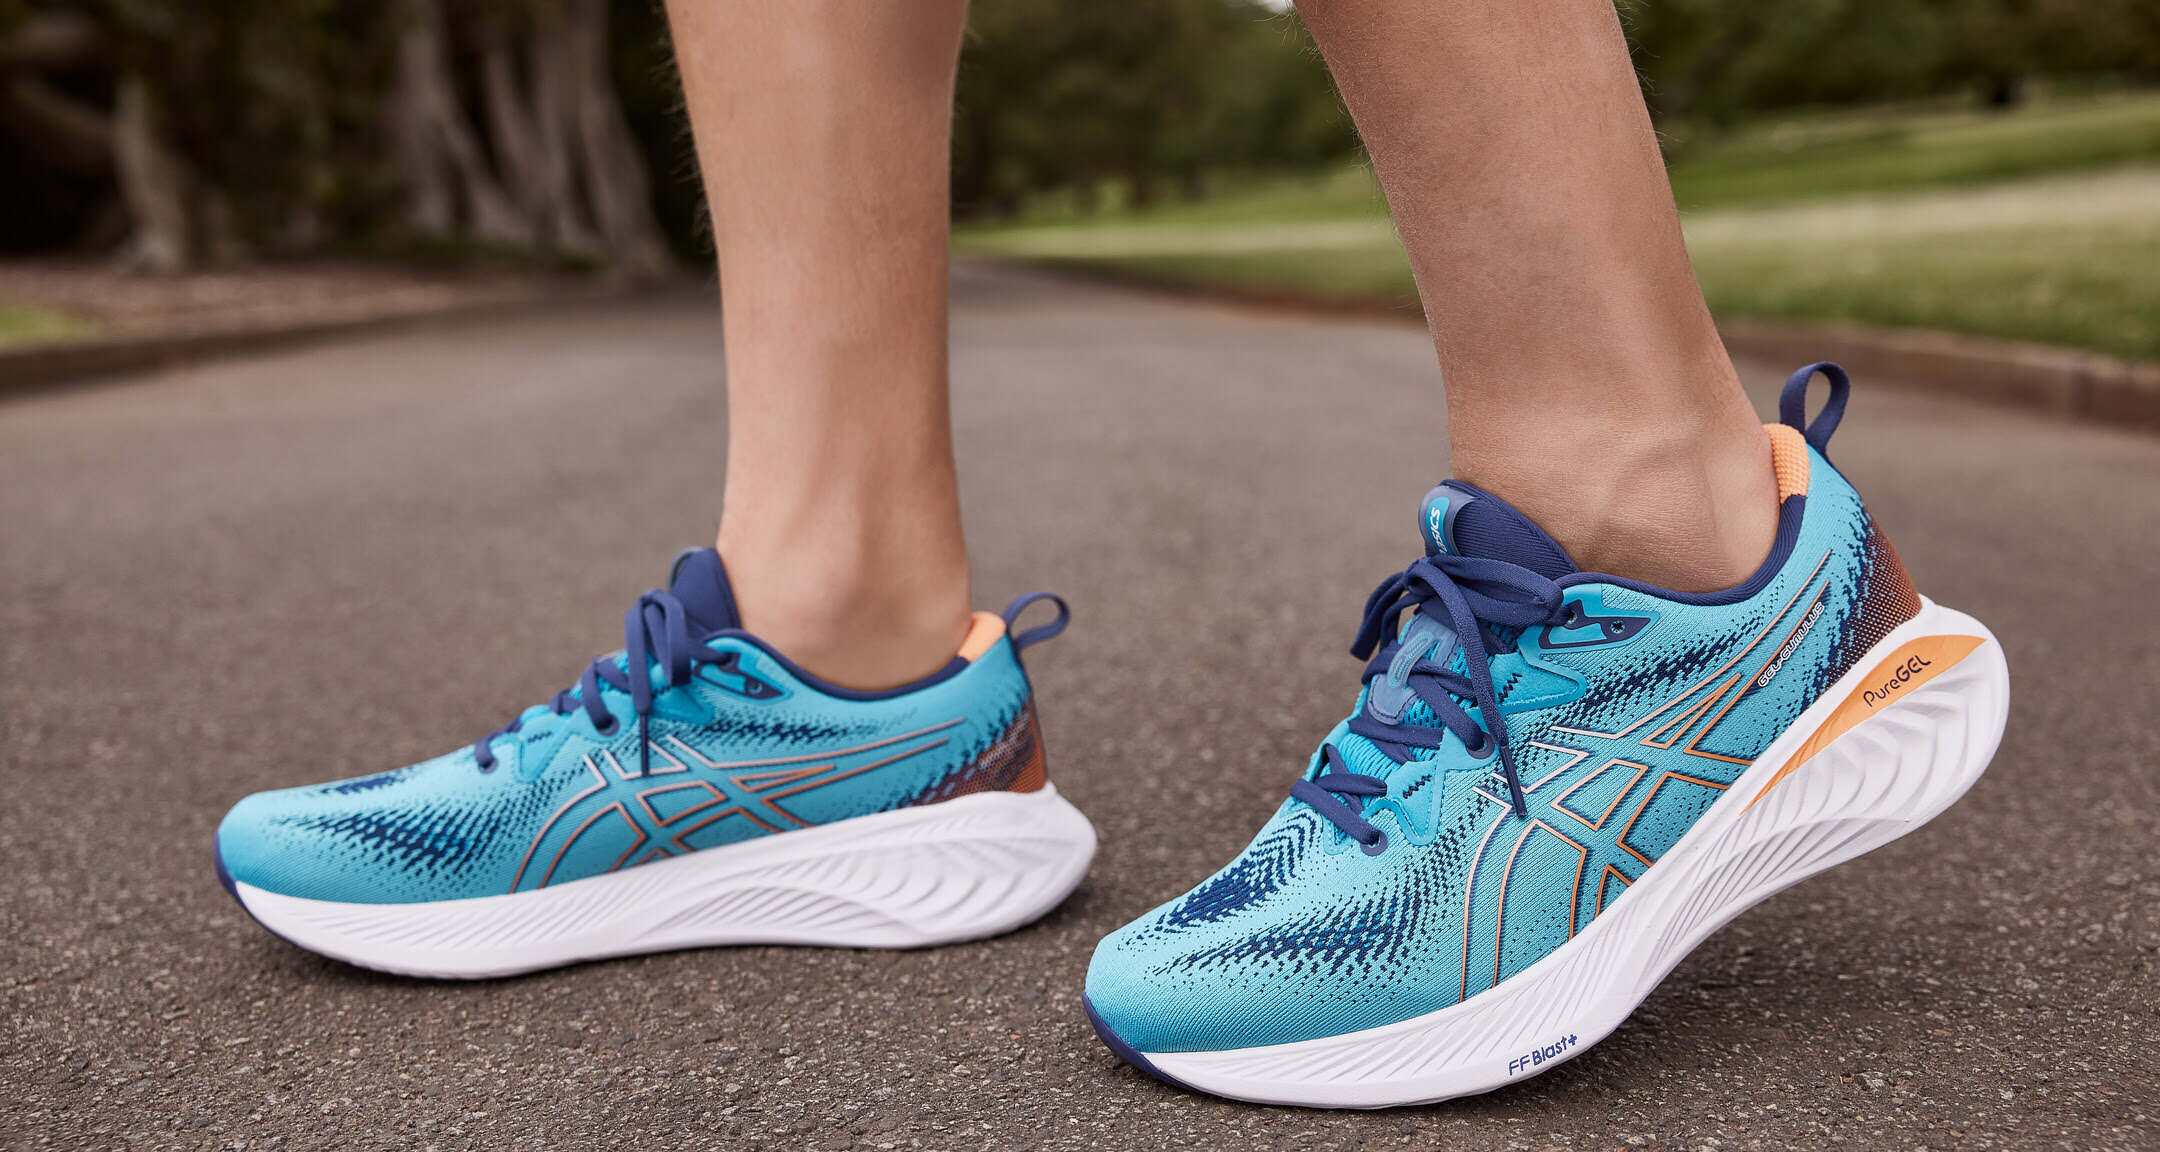 Choose the Best Running Shoes for Metatarsalgia